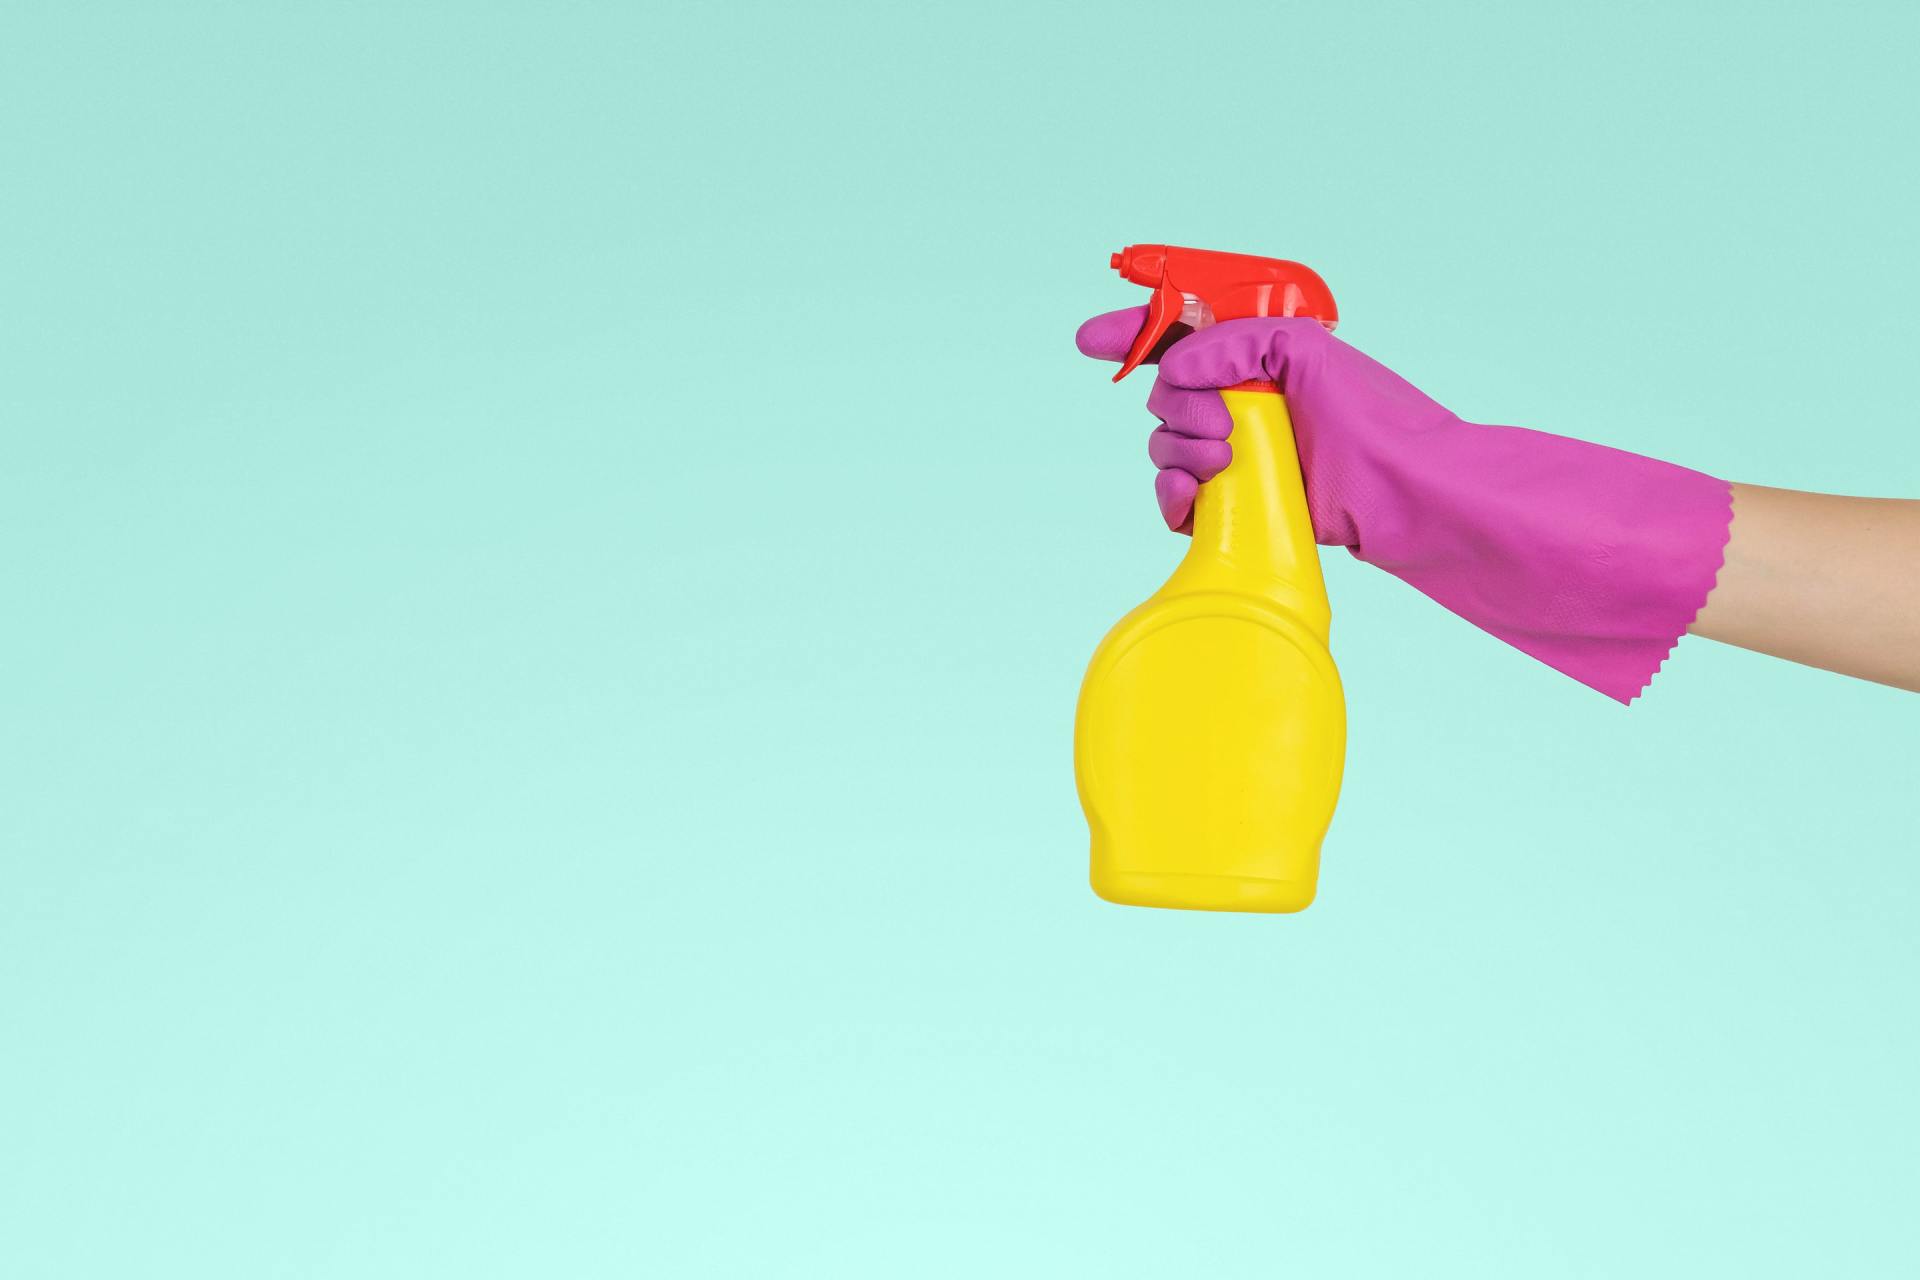 A cleaning operative sprays a cleaning chemical bottle